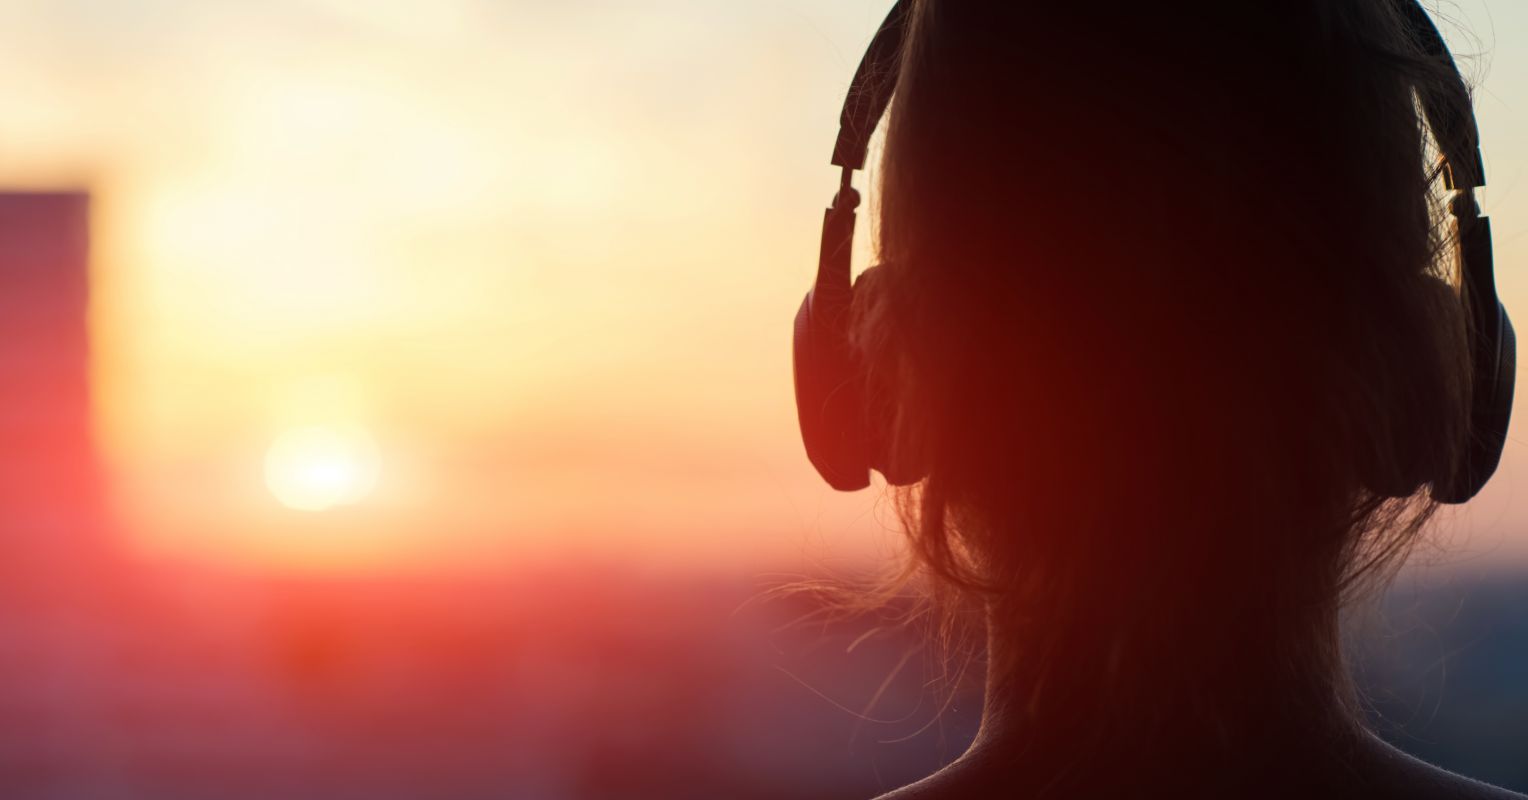 How to Improve Anxiety, Sleep, and More with Binaural Beats